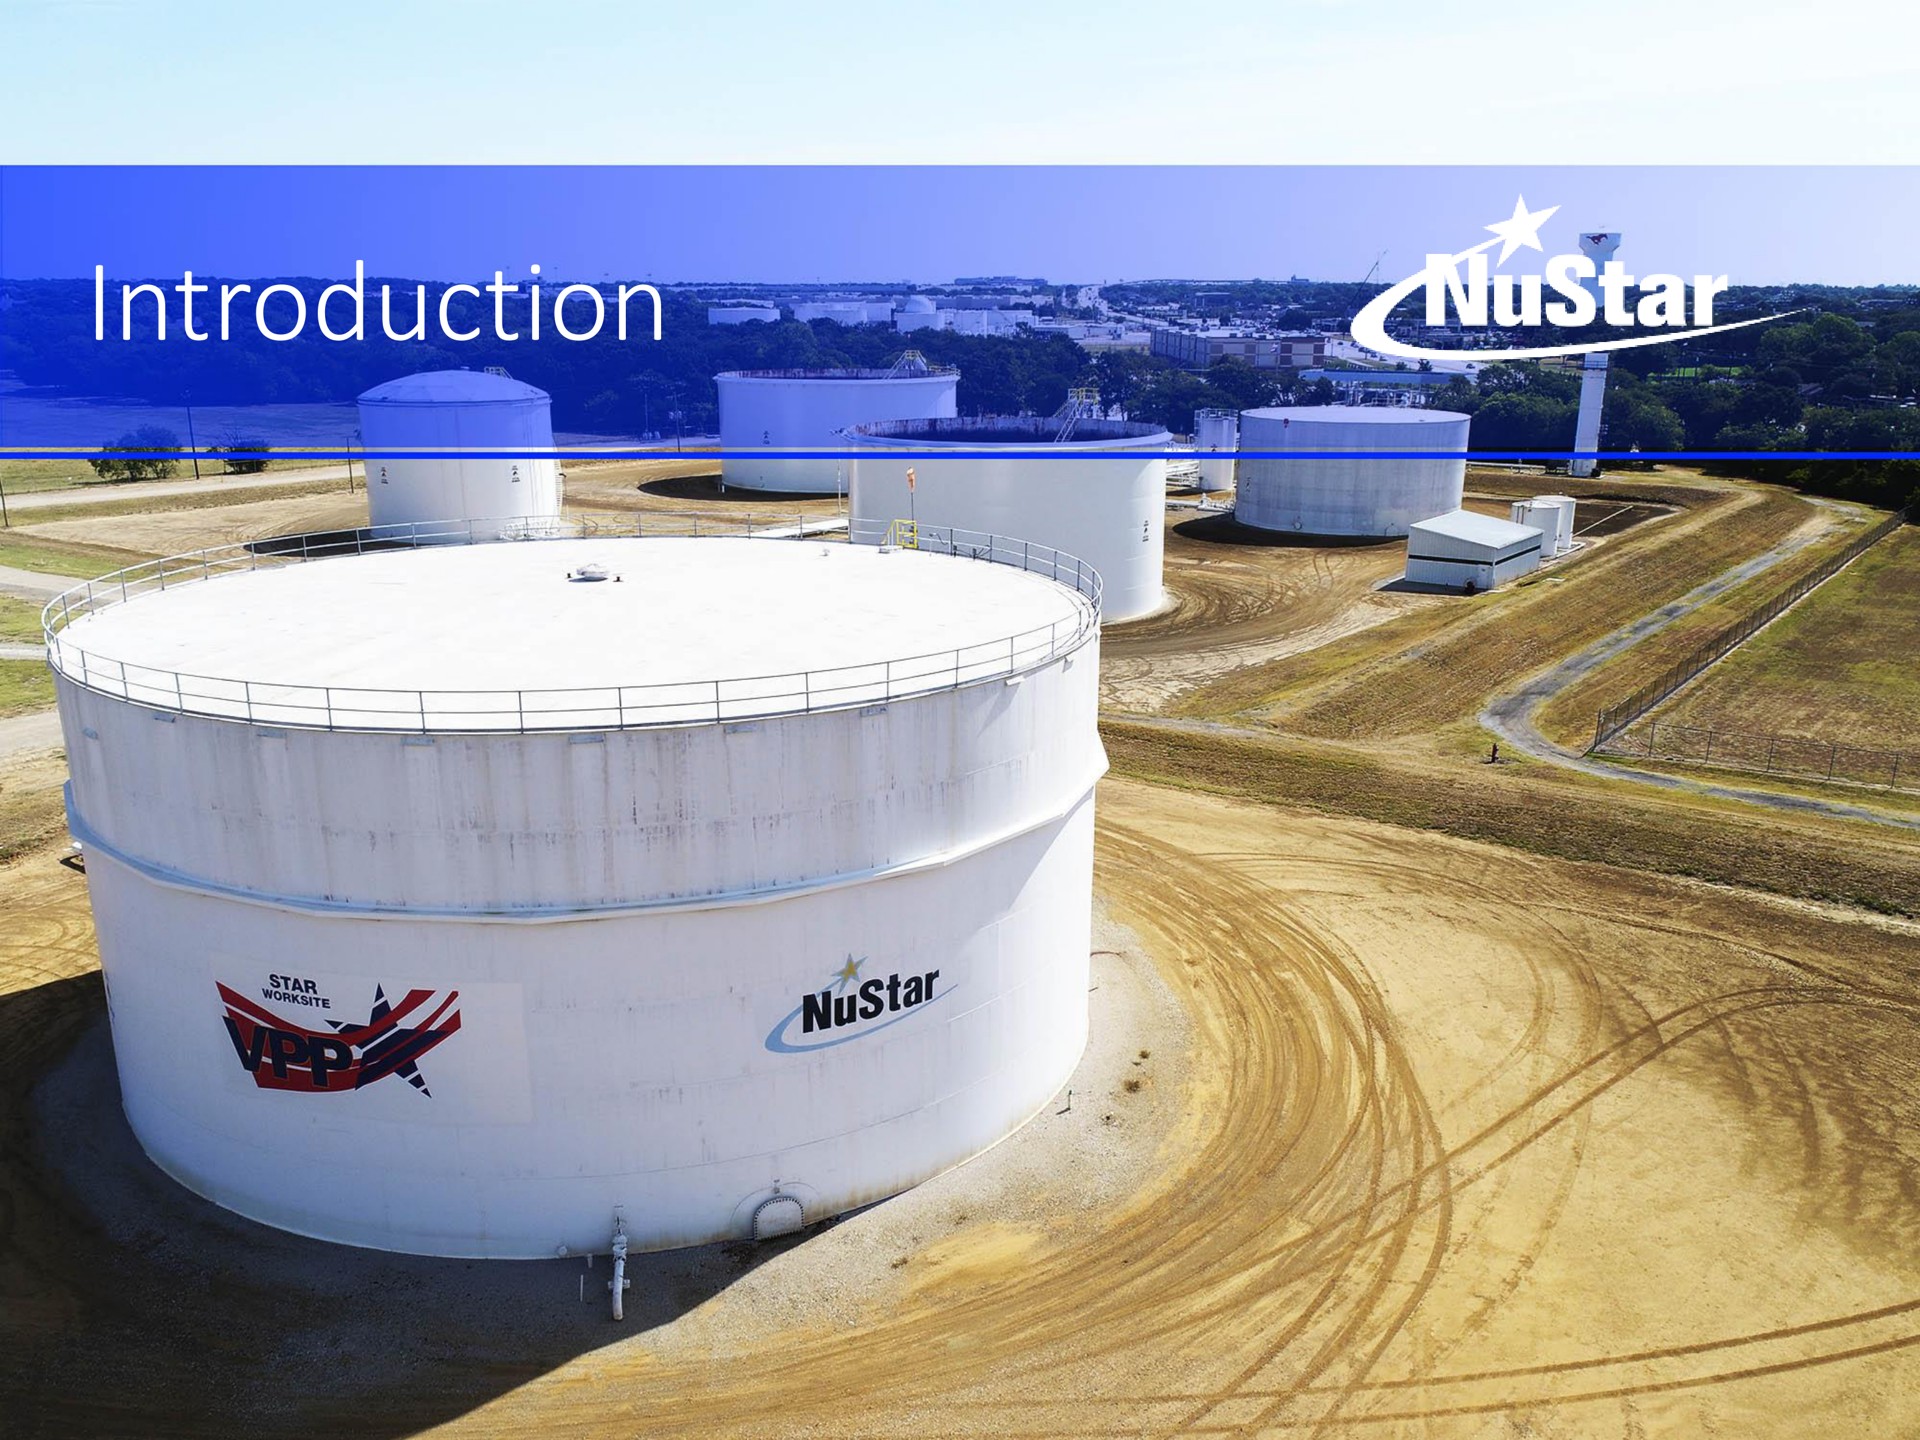 the basin introduction phenomenal growth driving midstream opportunities | NuStar Energy